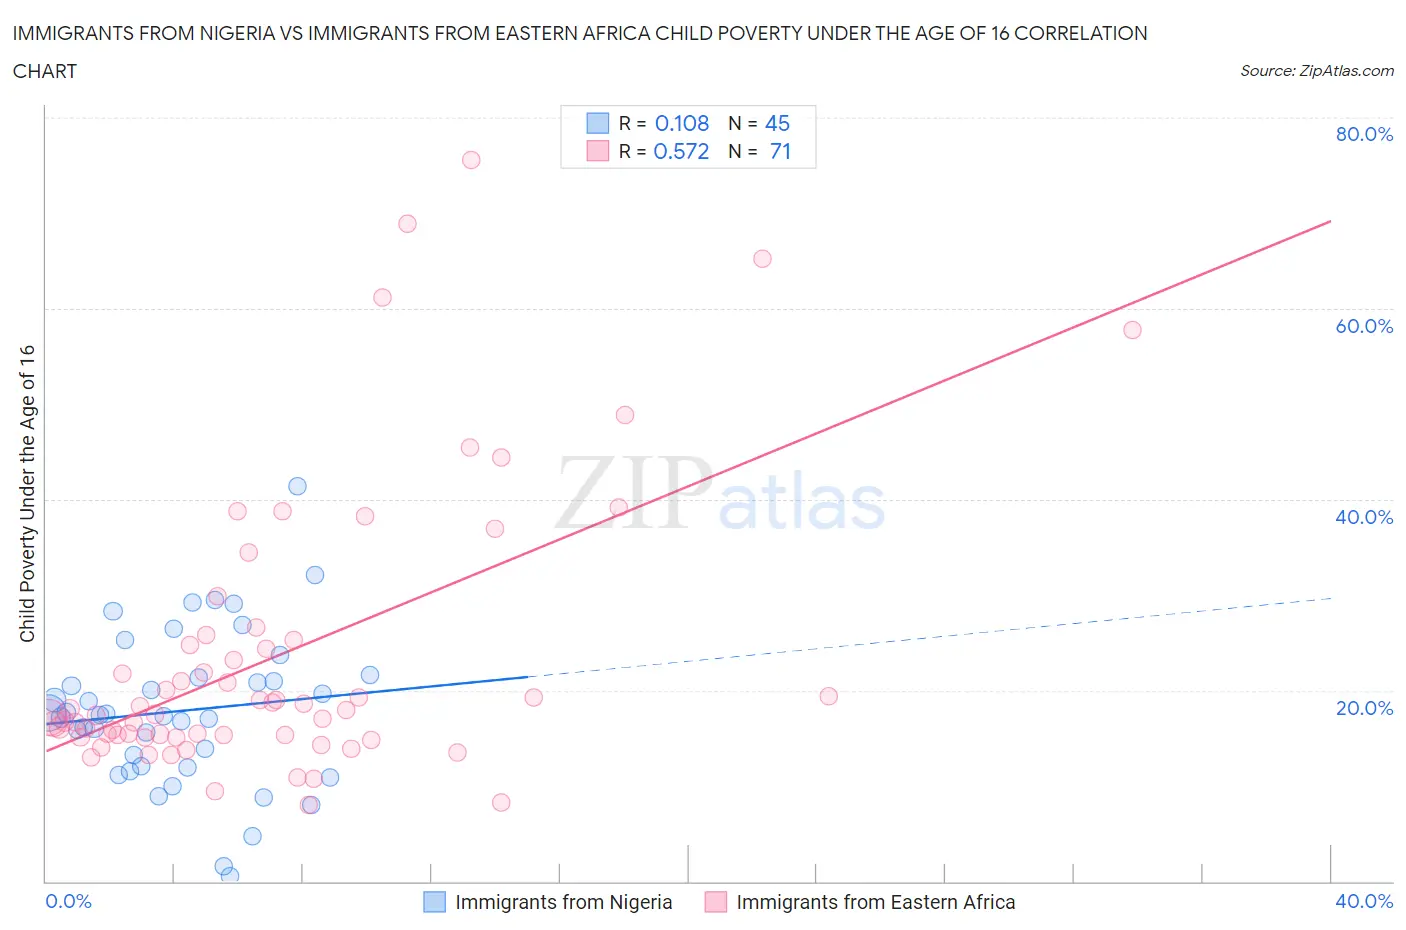 Immigrants from Nigeria vs Immigrants from Eastern Africa Child Poverty Under the Age of 16